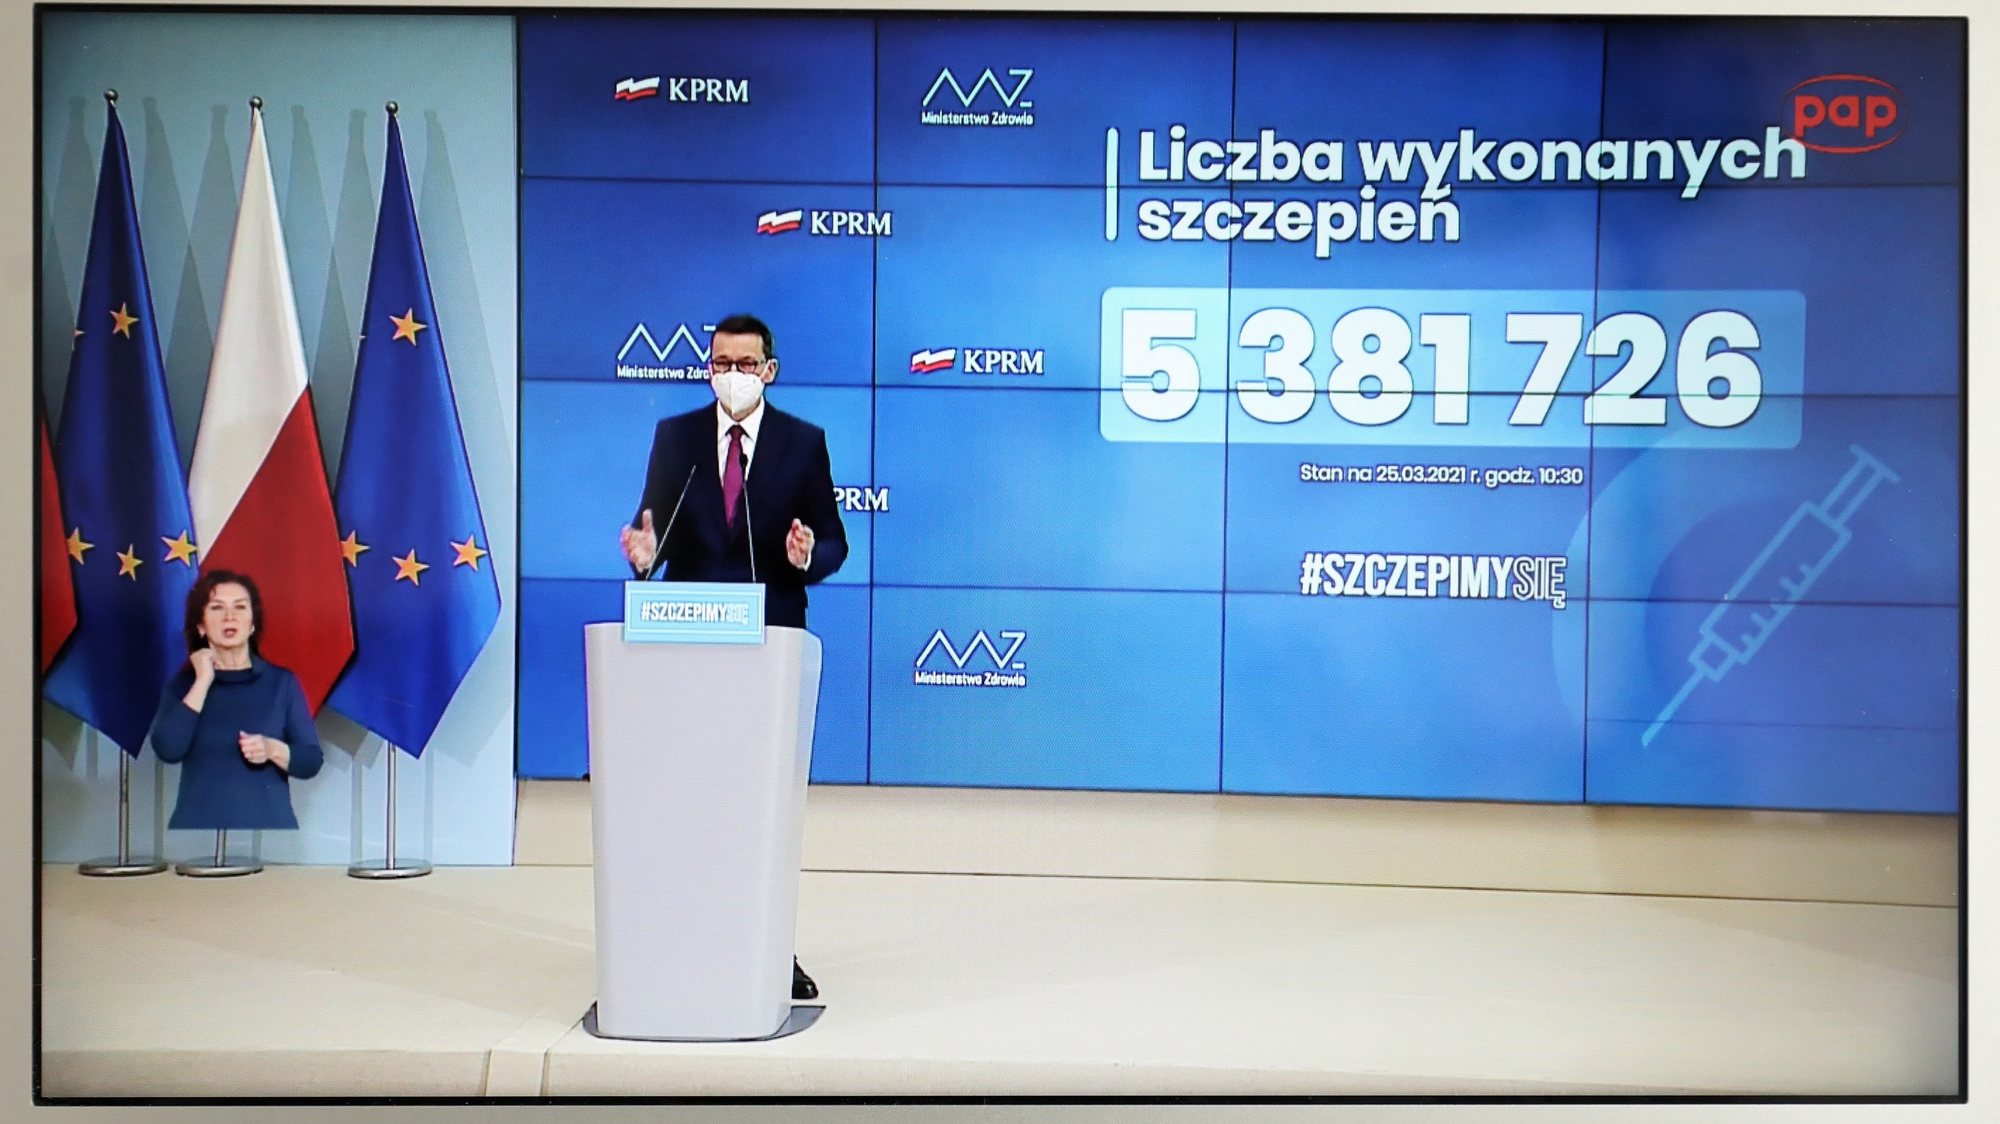 epa09095668 A television screen shows Polish Prime Minister Mateusz Morawiecki during a press conference on the coronavirus pandemic situation in Warsaw, Poland, 25 March 2021. In all, 5,381,726 Poles have already received jabs against COVID-19, with 1,857,517 of those having had both doses of the vaccine, according to data posted on the official government website.  EPA/Pawel Supernak POLAND OUT